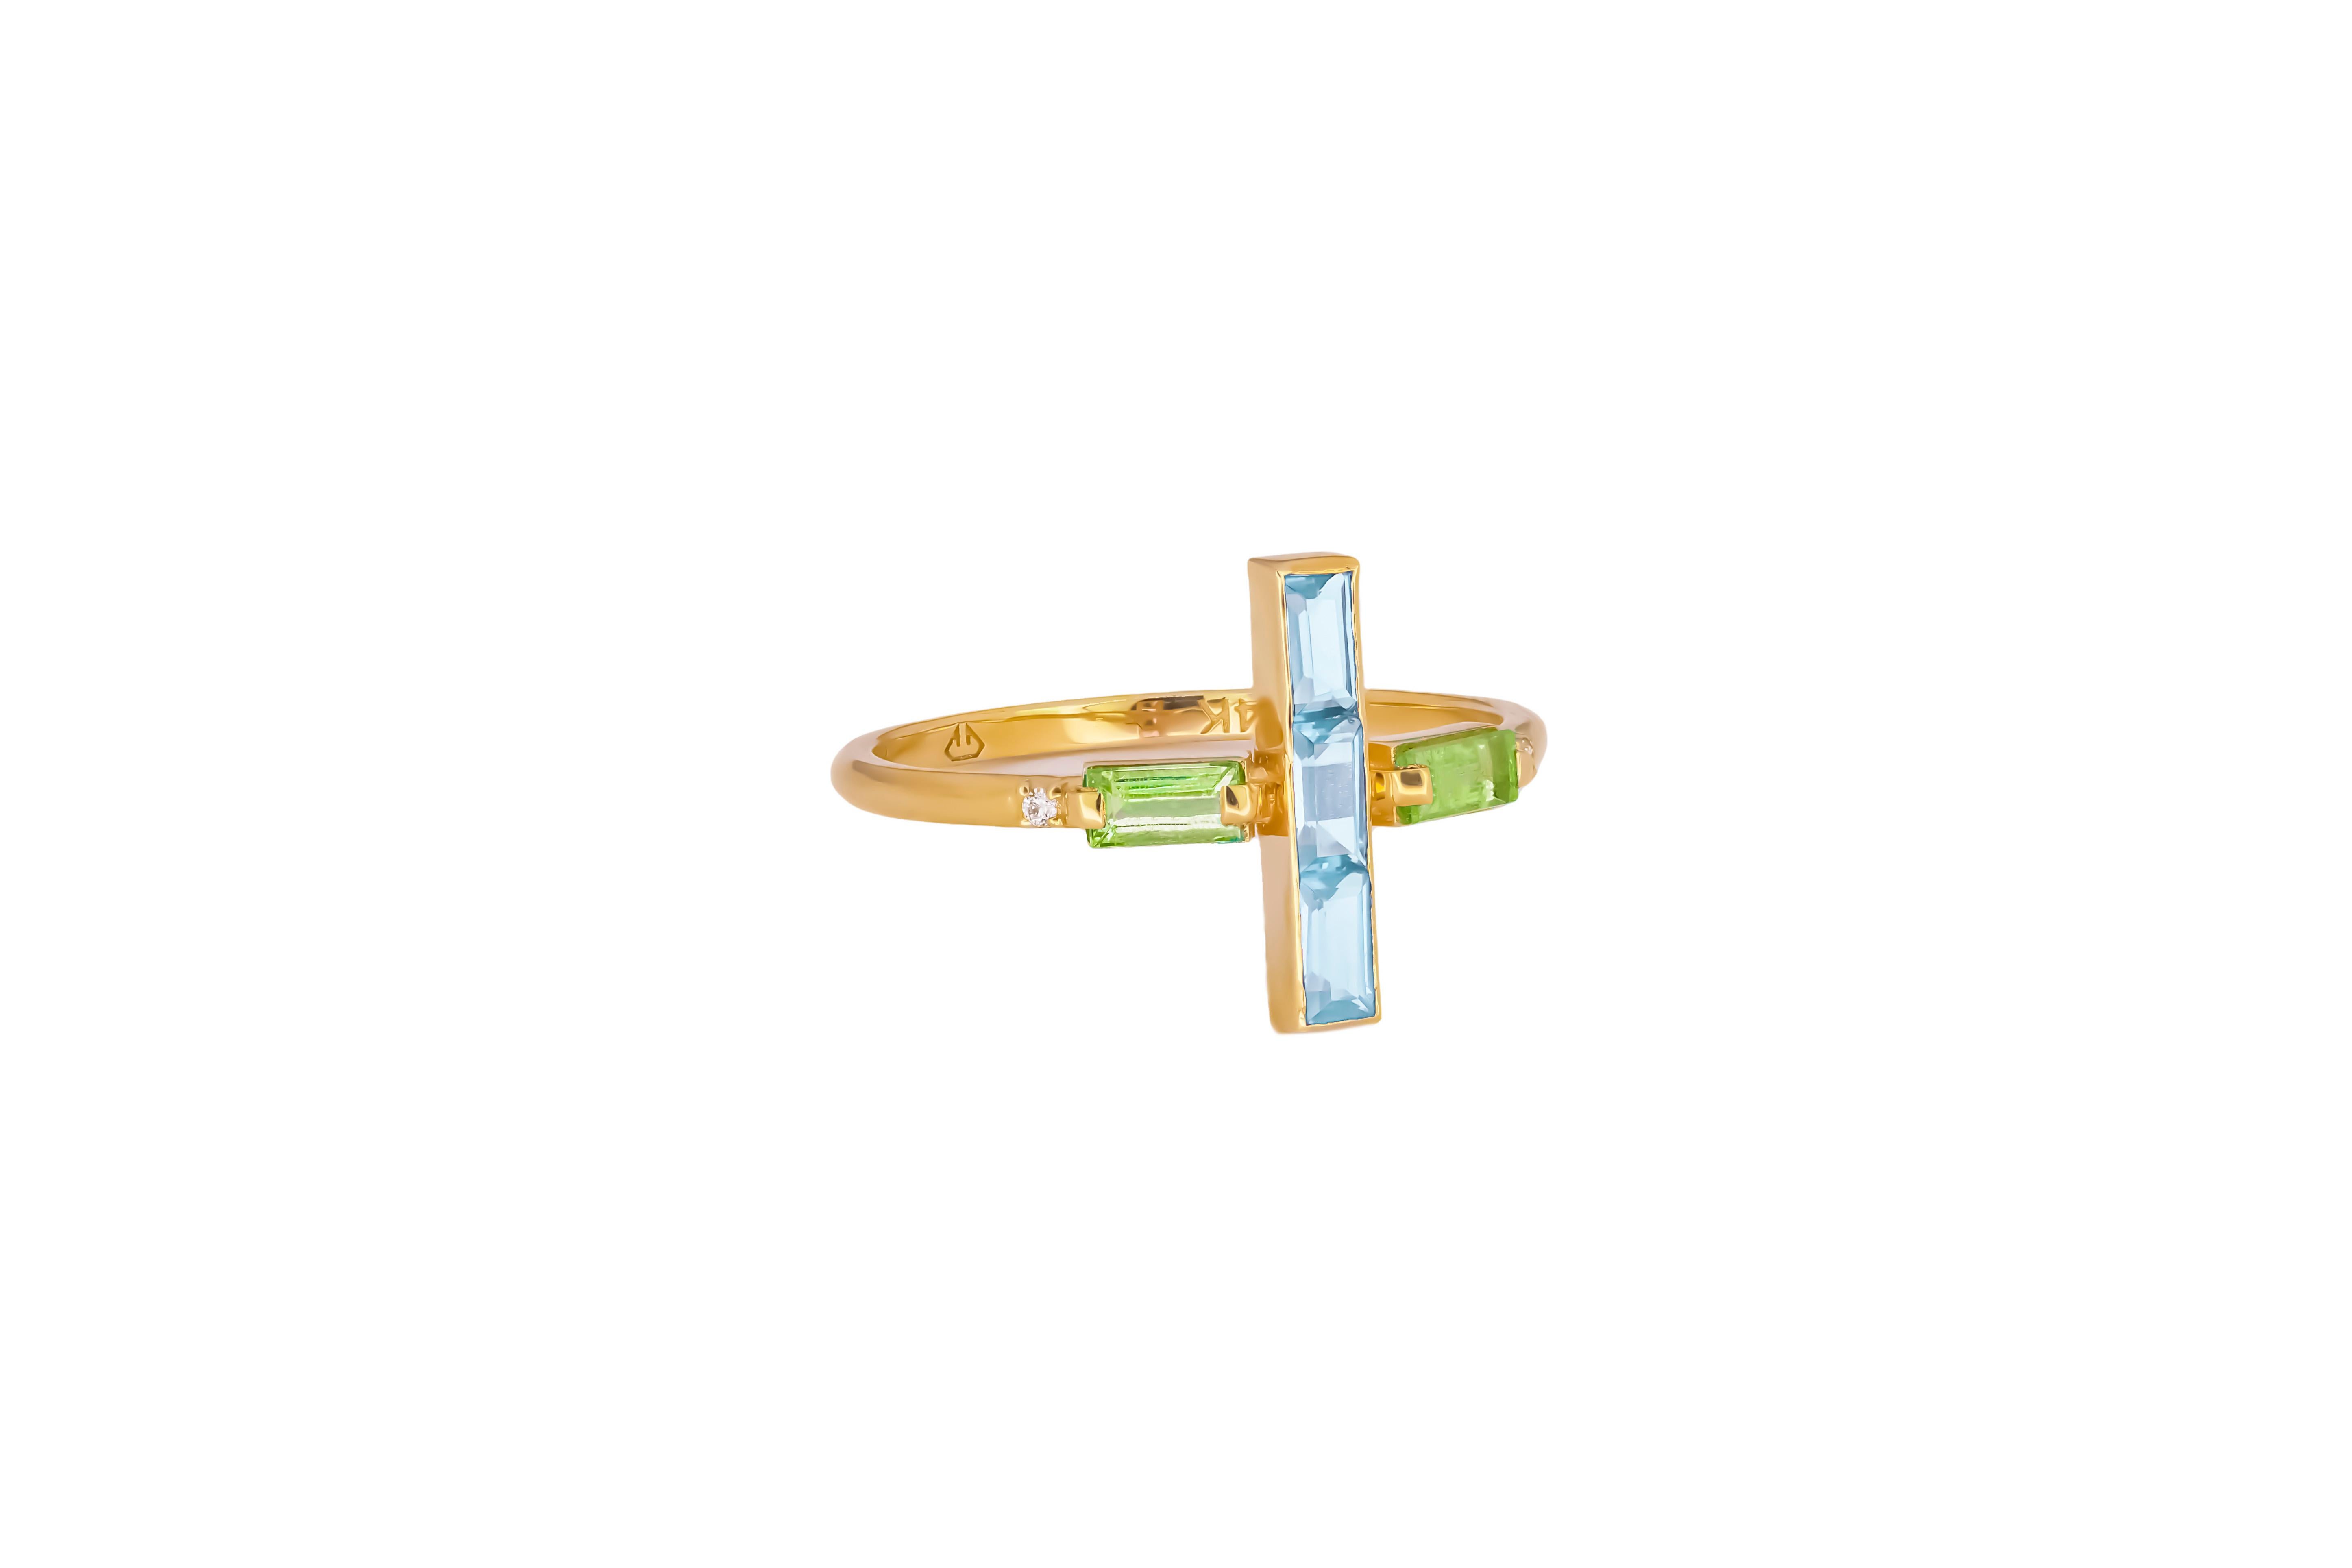 Topaz and peridot 14k gold ring.  
14K Solid Gold Cross Ring. Solid Gold Cross Ring with Gemstones. Topaz gold ring. Peridot gold ring. Baguette topaz ring. Blue gemstone ring. Green gemstone ring. Colorful gold ring. Genuine peridot ring. Peridot